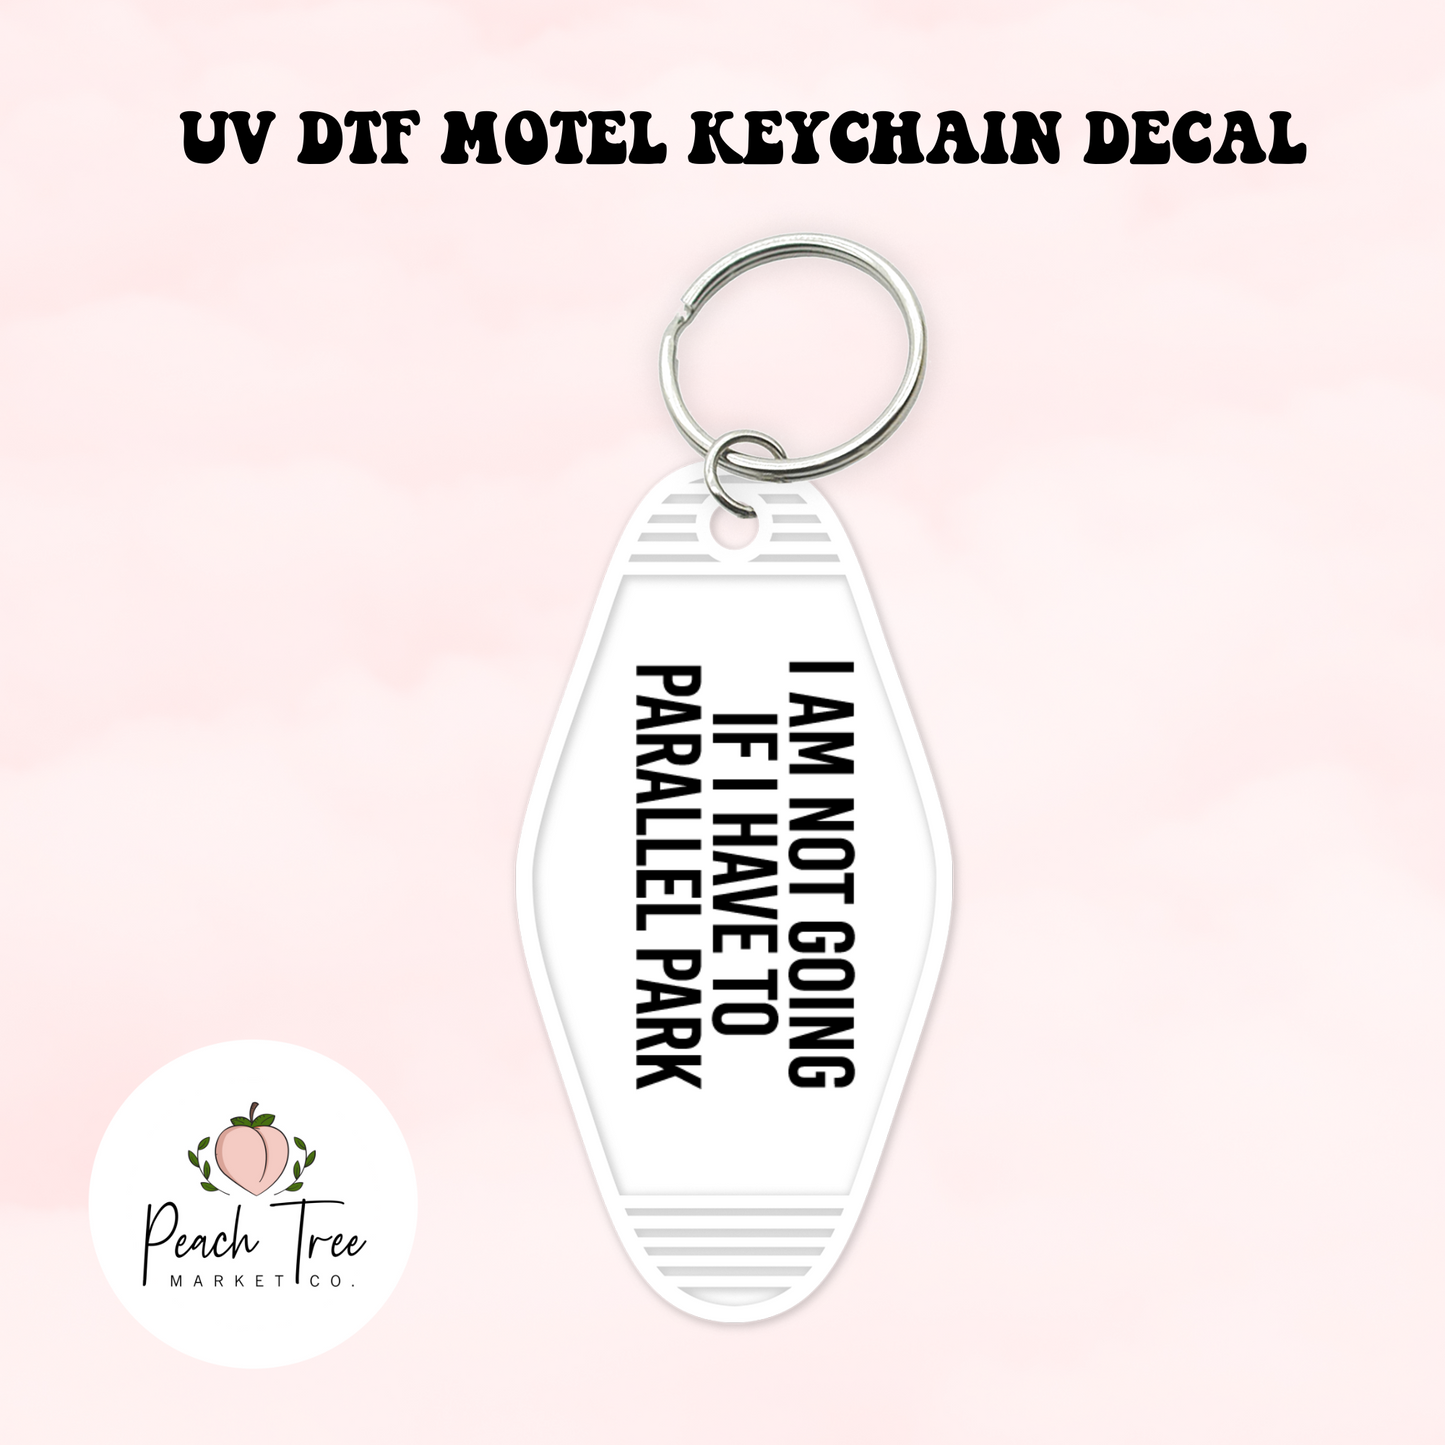 Parallel Park UV DTF Motel Keychain Decal